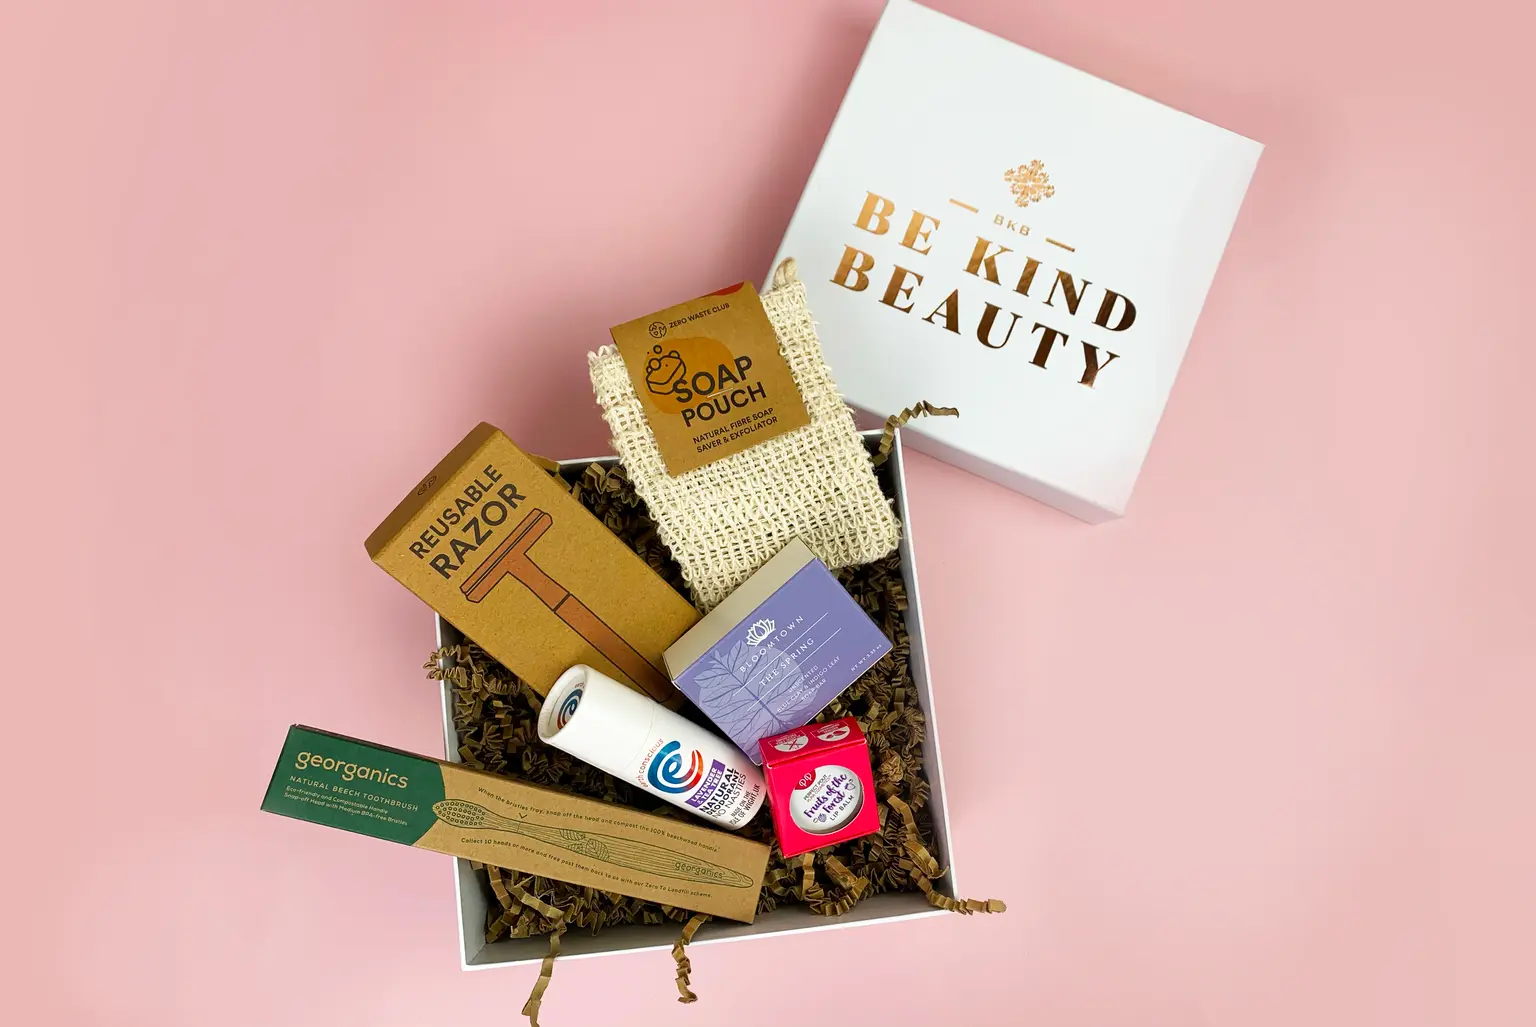 Making cruelty-free beauty the new norm